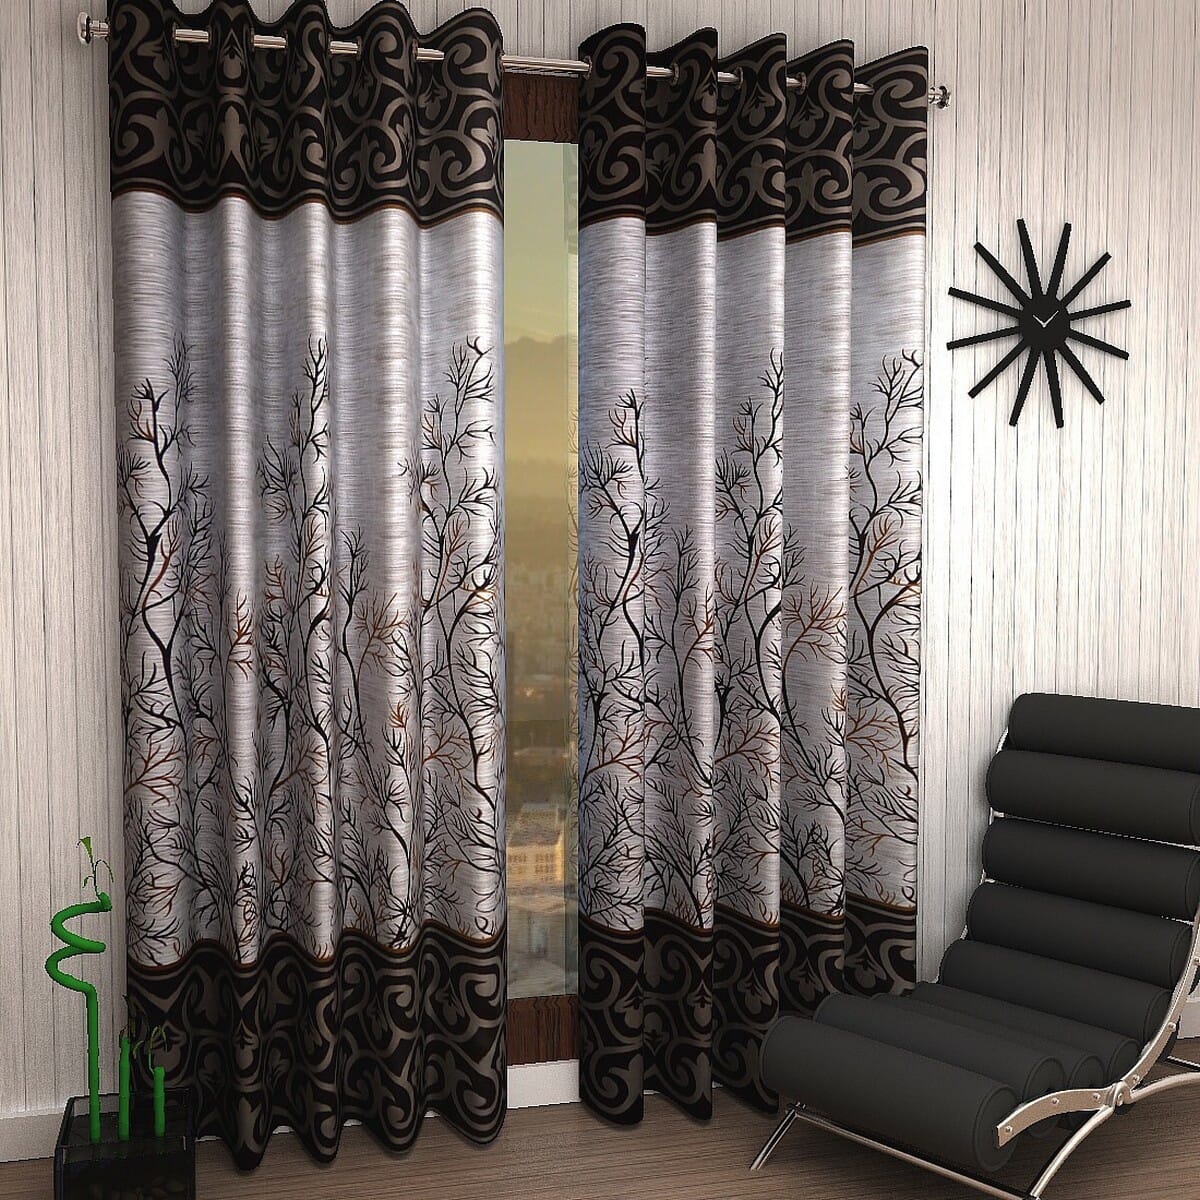 Buy clingless curtain keeper, Online in OMAN at Low Prices at desertcart